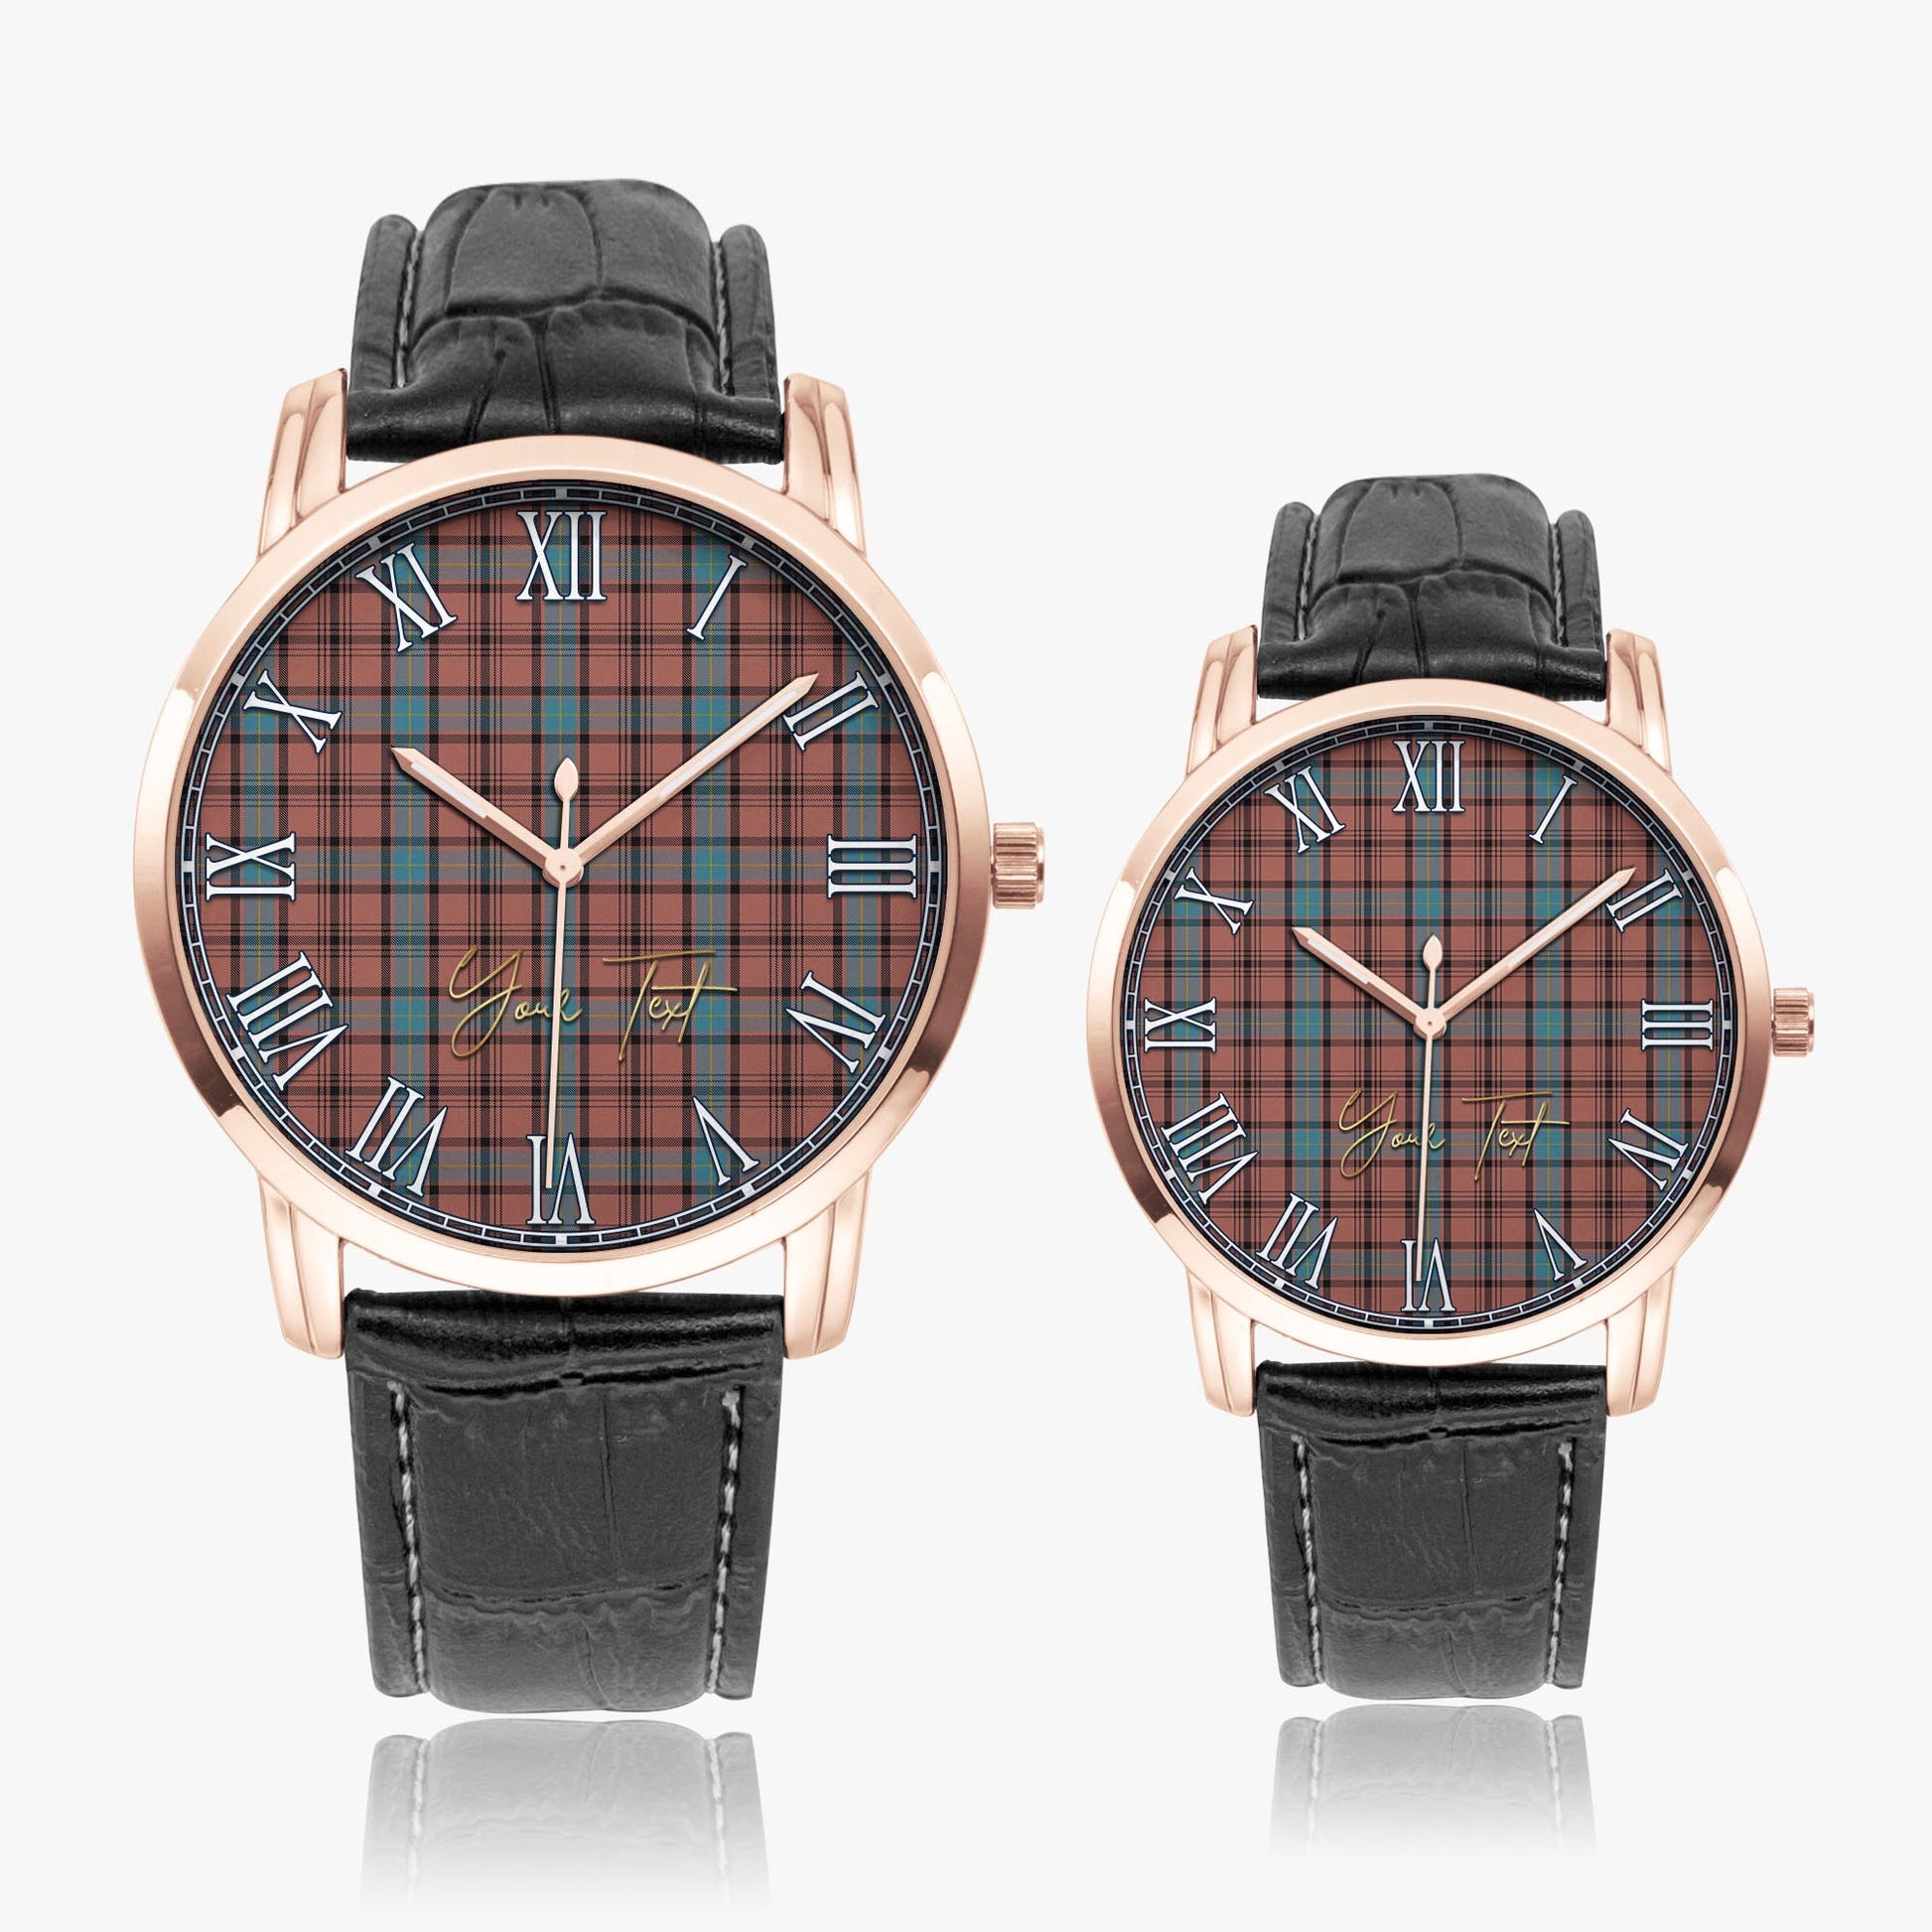 Hannay Dress Tartan Personalized Your Text Leather Trap Quartz Watch Wide Type Rose Gold Case With Black Leather Strap - Tartanvibesclothing